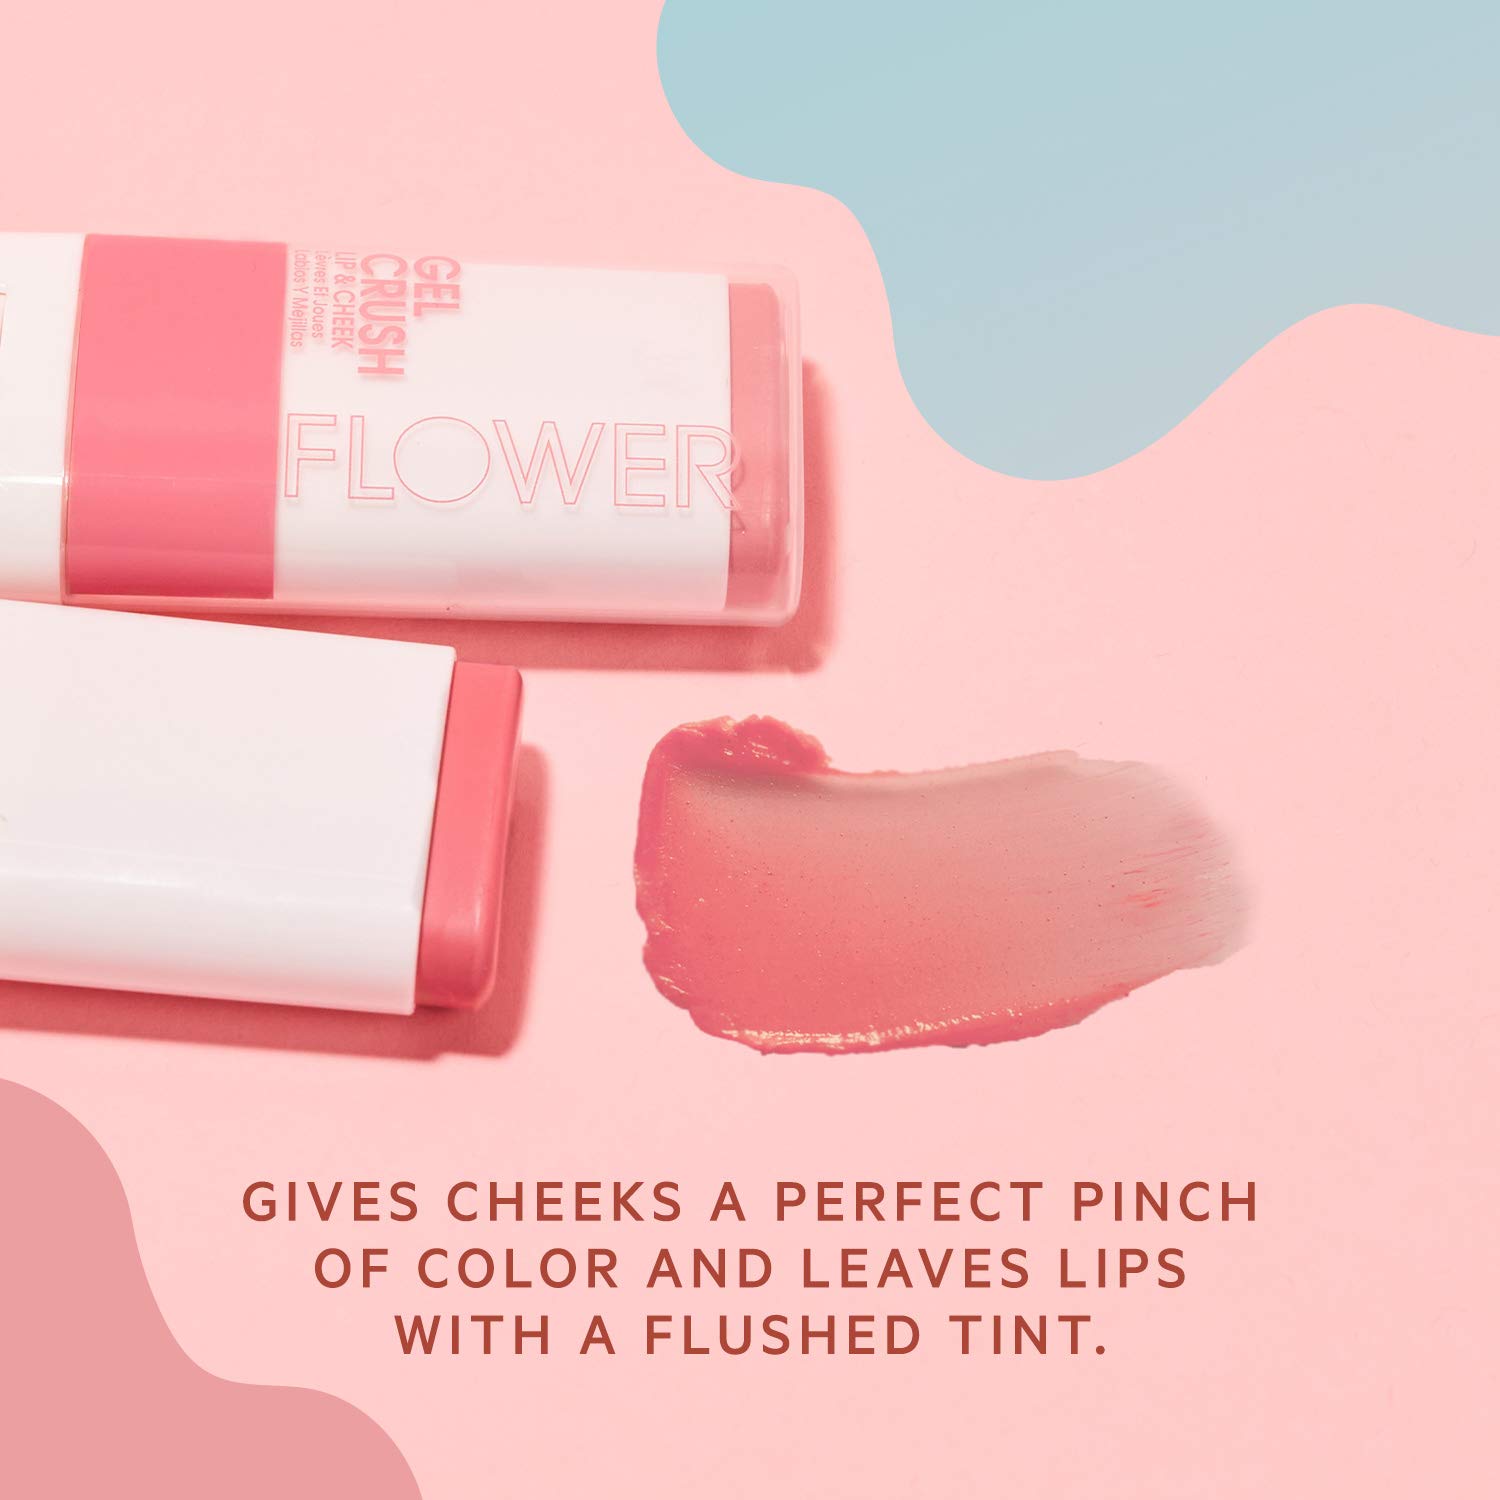 FLOWER BEAUTY Lip & Cheek Gel Crush | Cream Blush and Lips Tint in One Portable Multistick | Hydrating Burst of Color | (Strawberry)